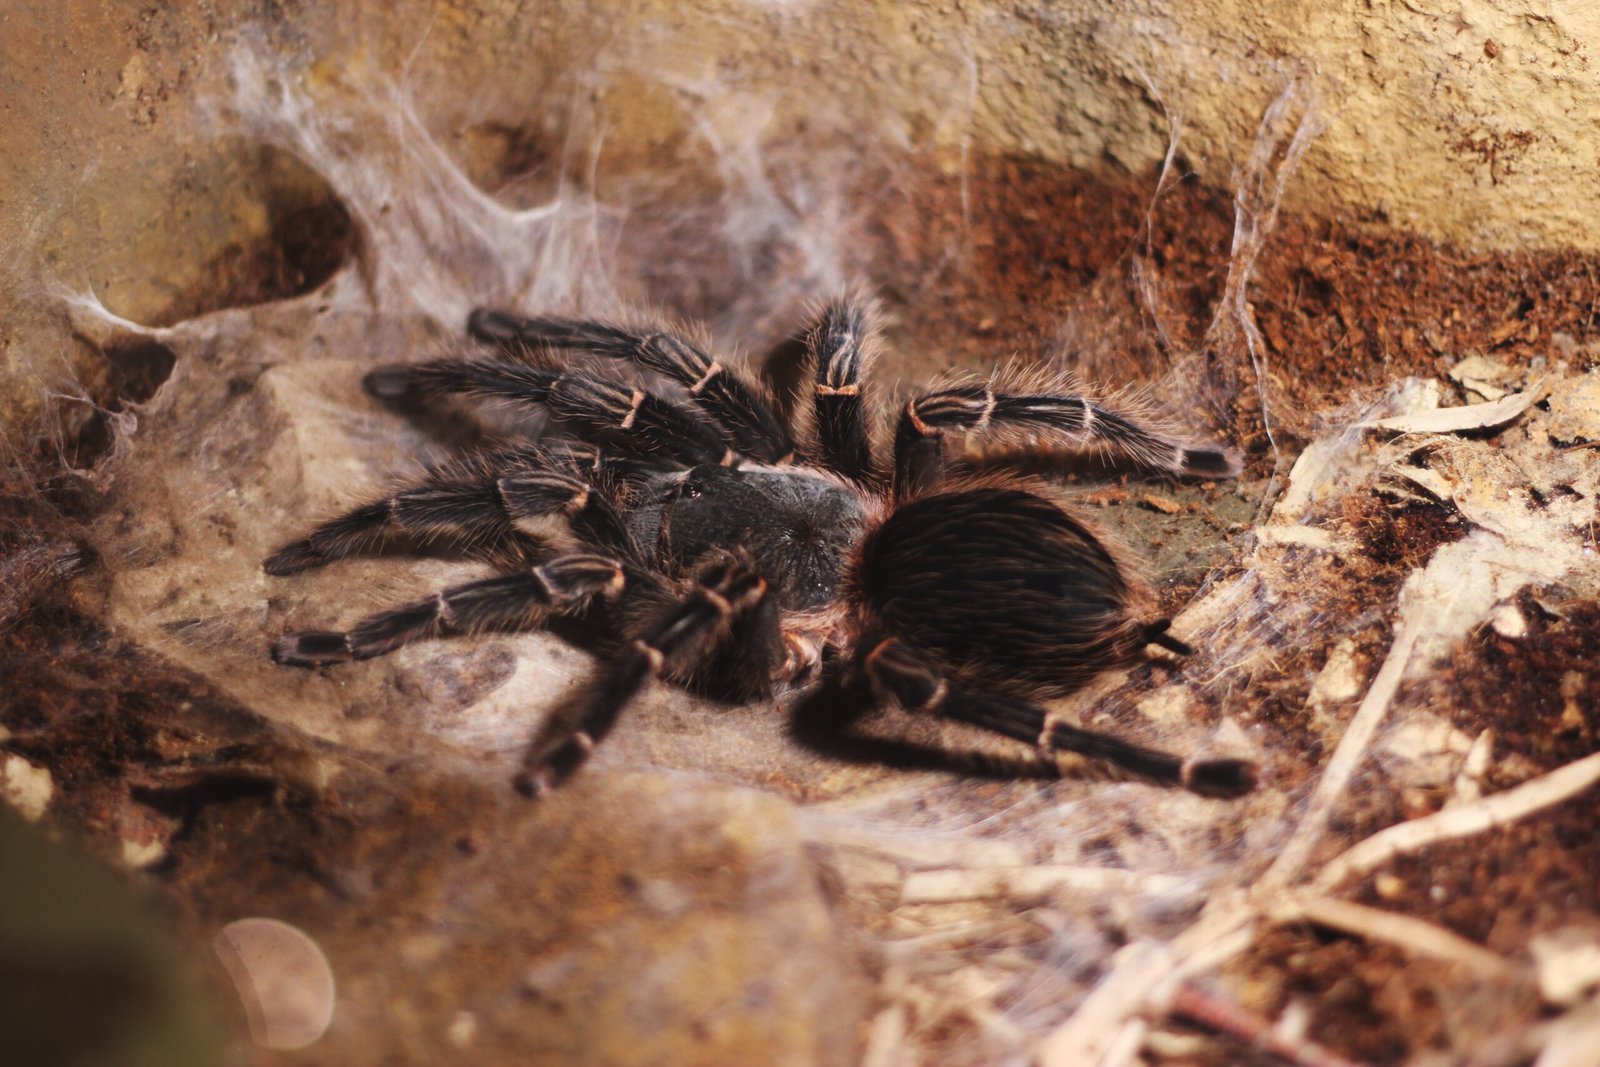 How Do You Create A Suitable Environment For The Brazilian Wandering Spider In Captivity?